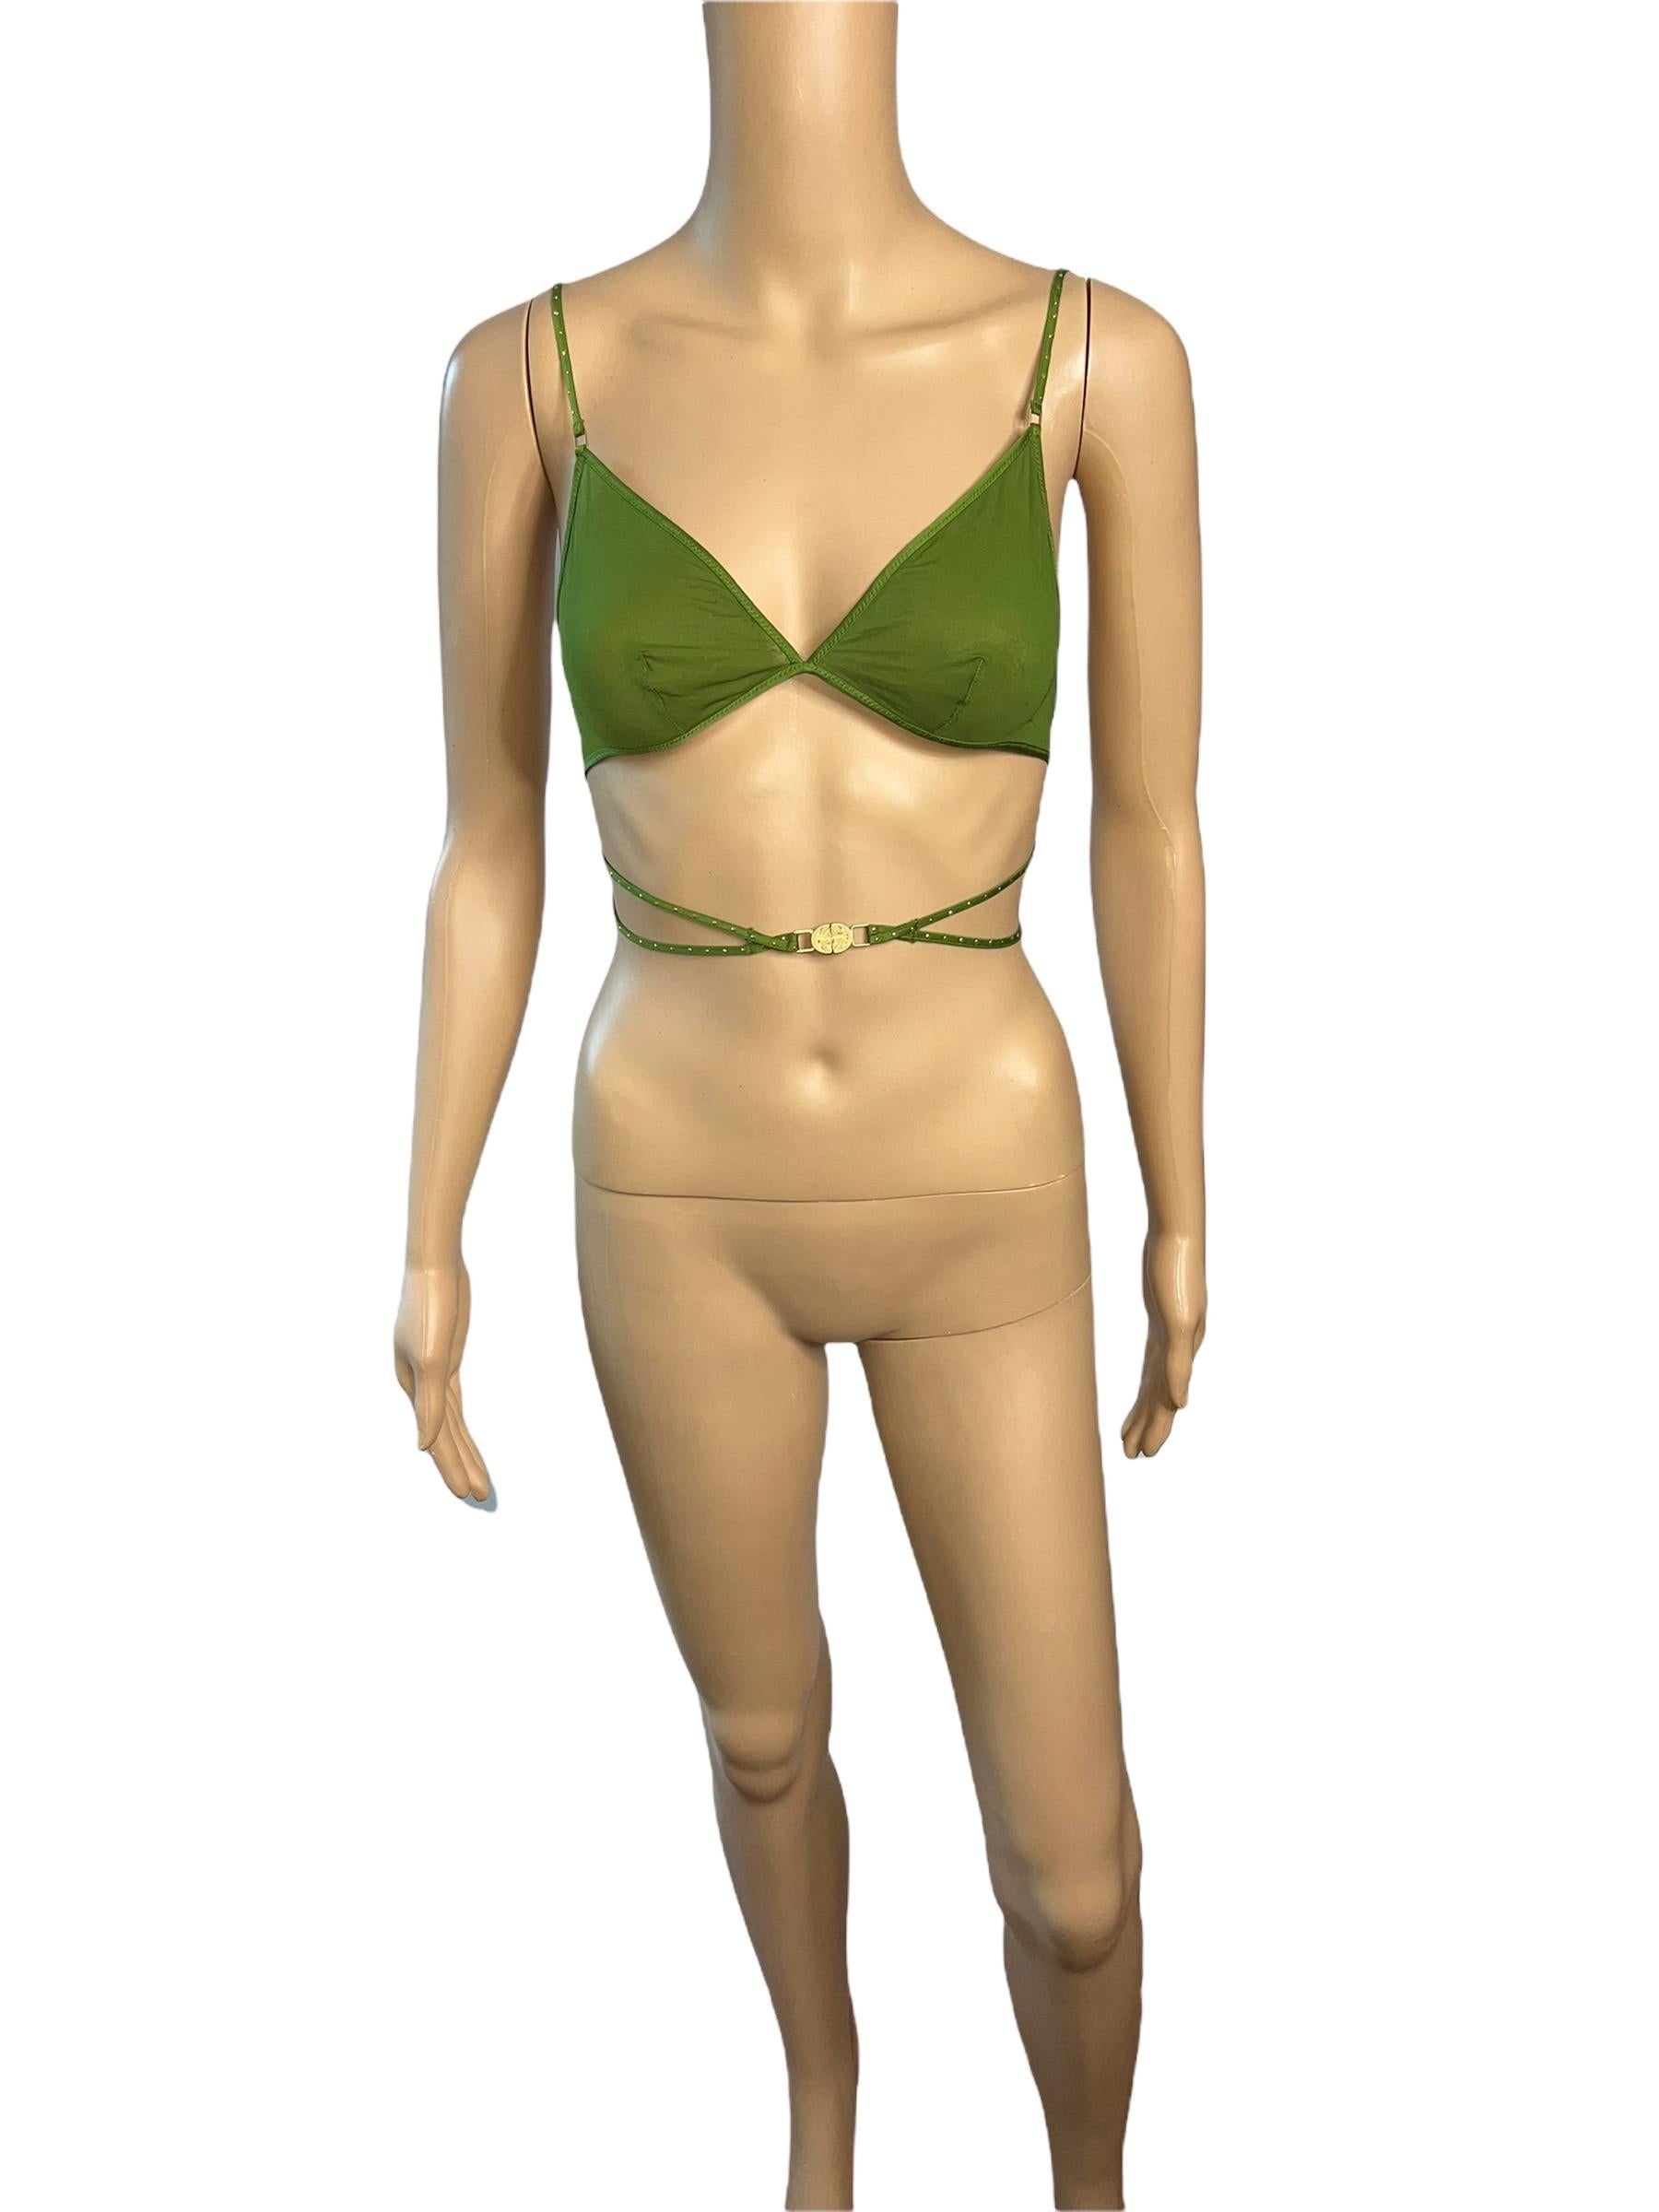 Tom Ford for Gucci F/W 2003 Bondage Studded Wrap Sheer Green Bra Lingerie Size M

Please note this bra hasn't been worn, however due to storage and time it has pulling throughout.

